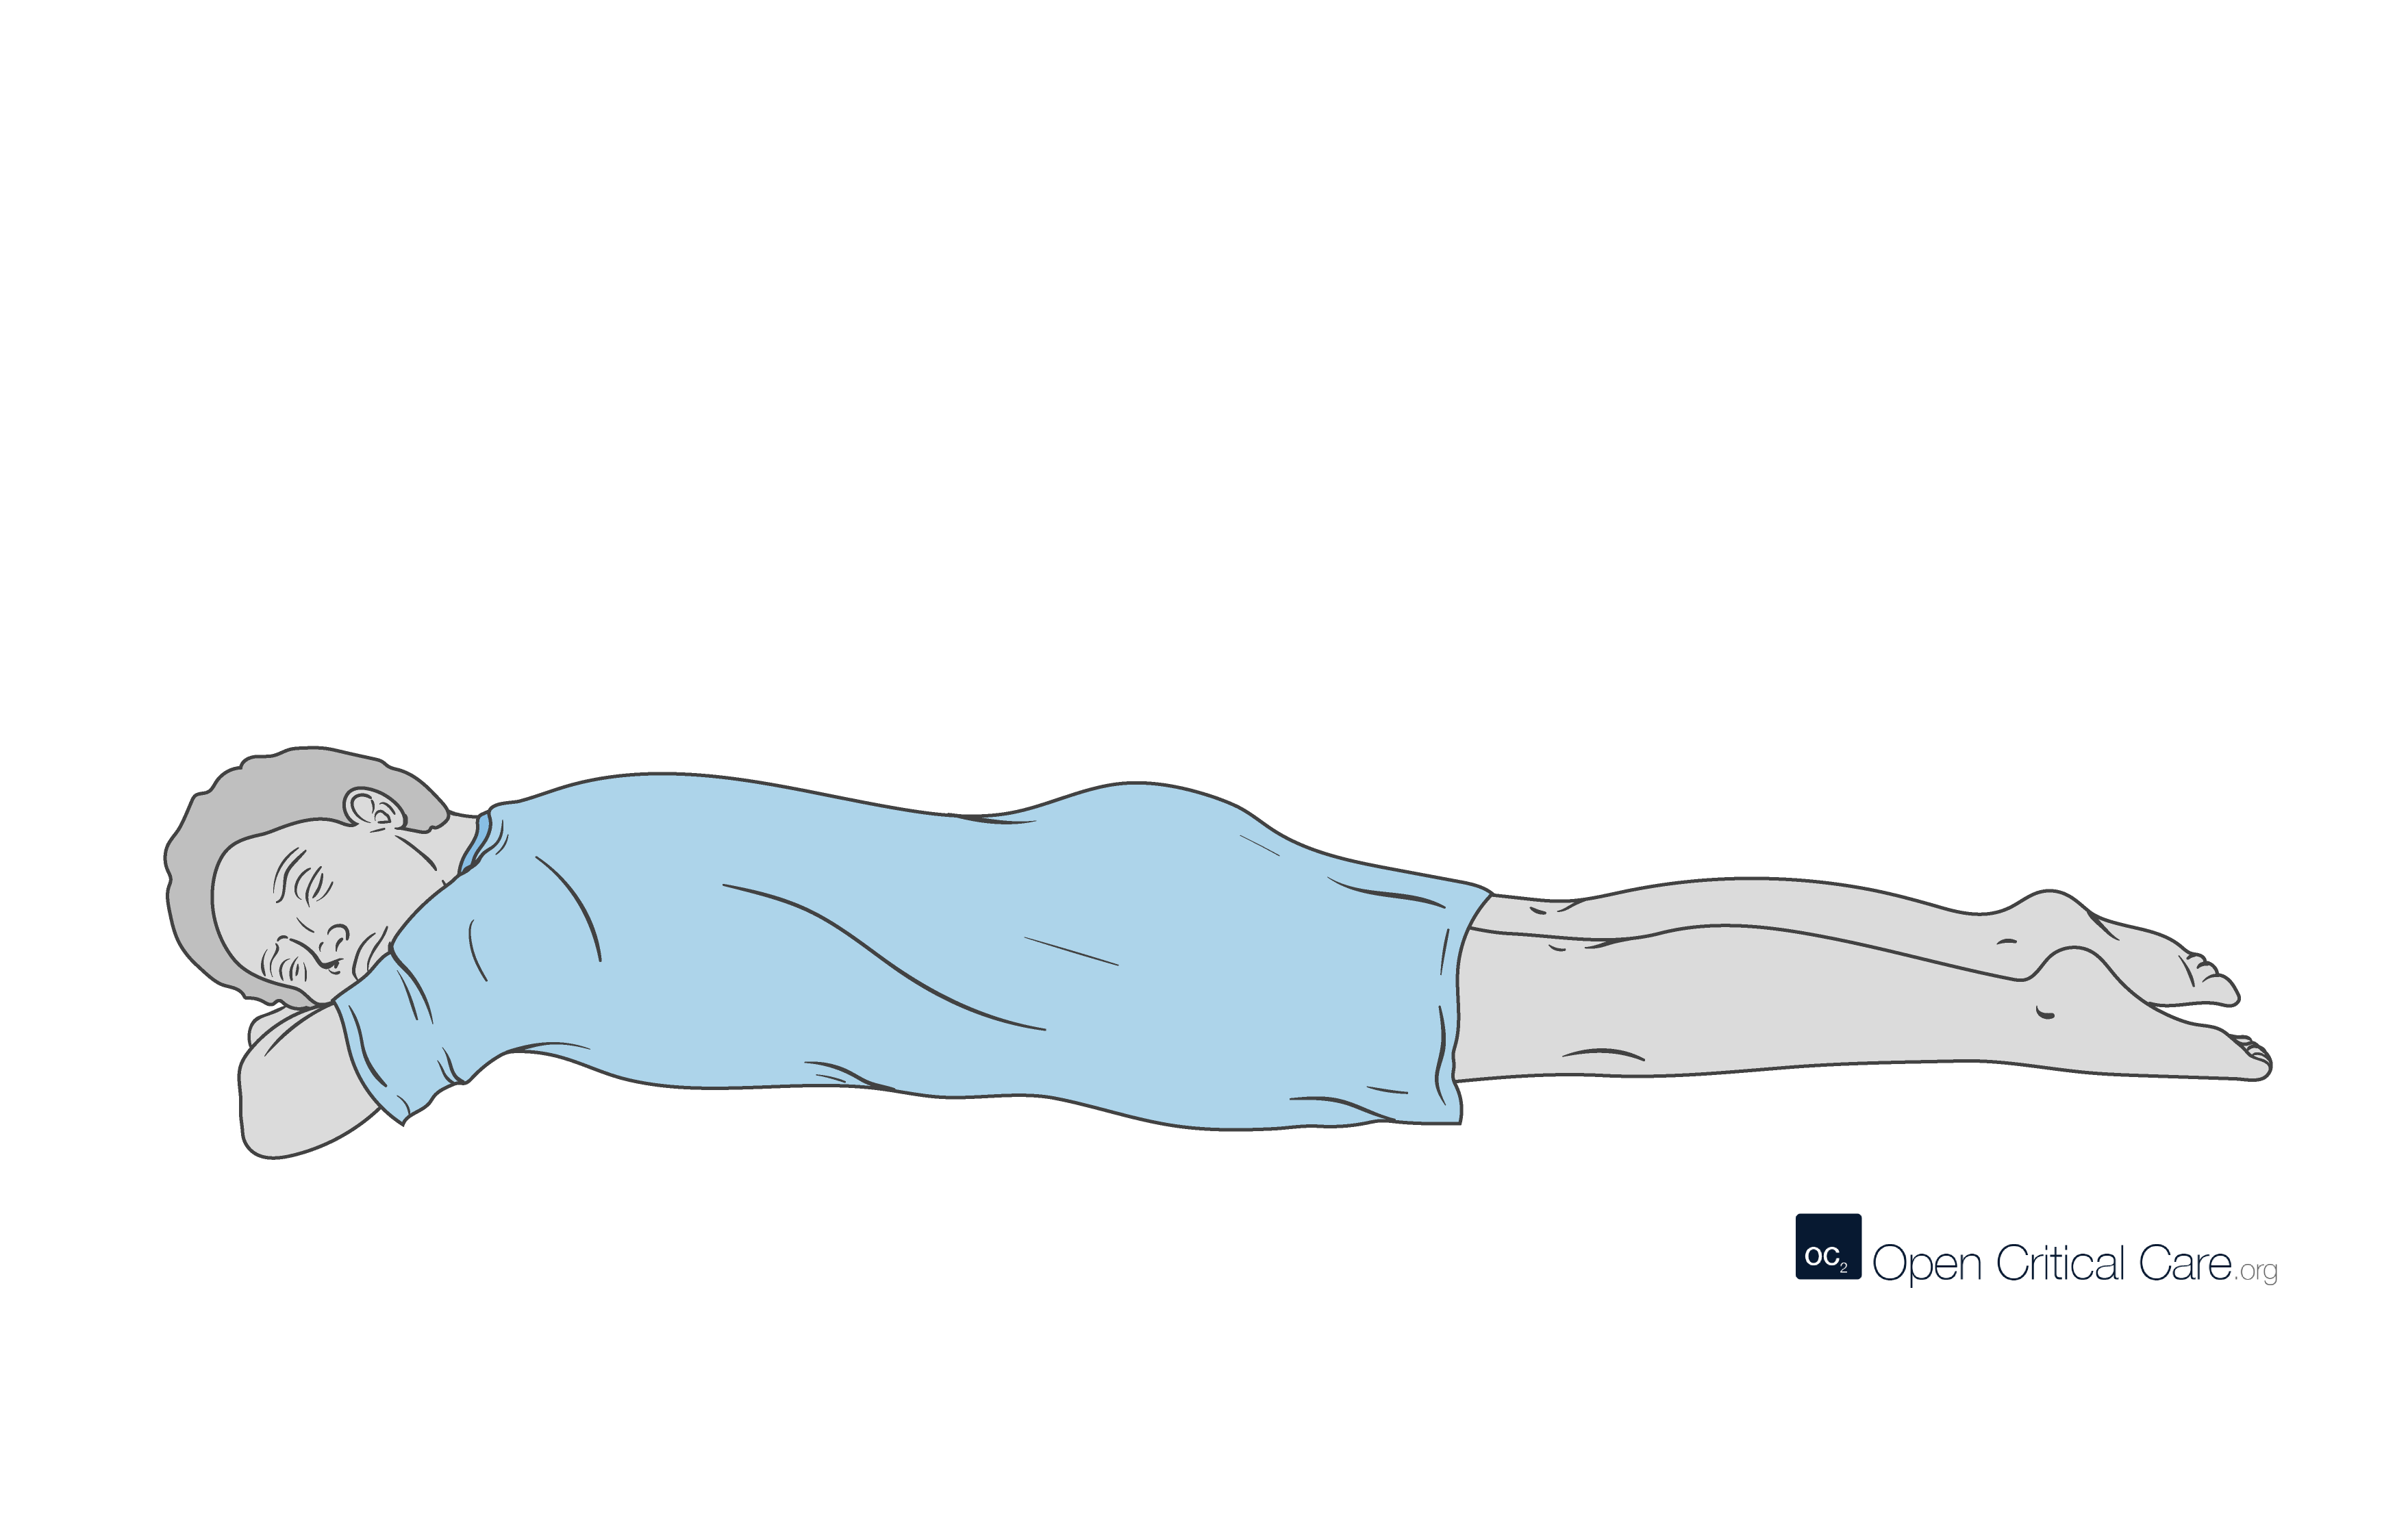 Prone positioning (side view) - Open Critical Care